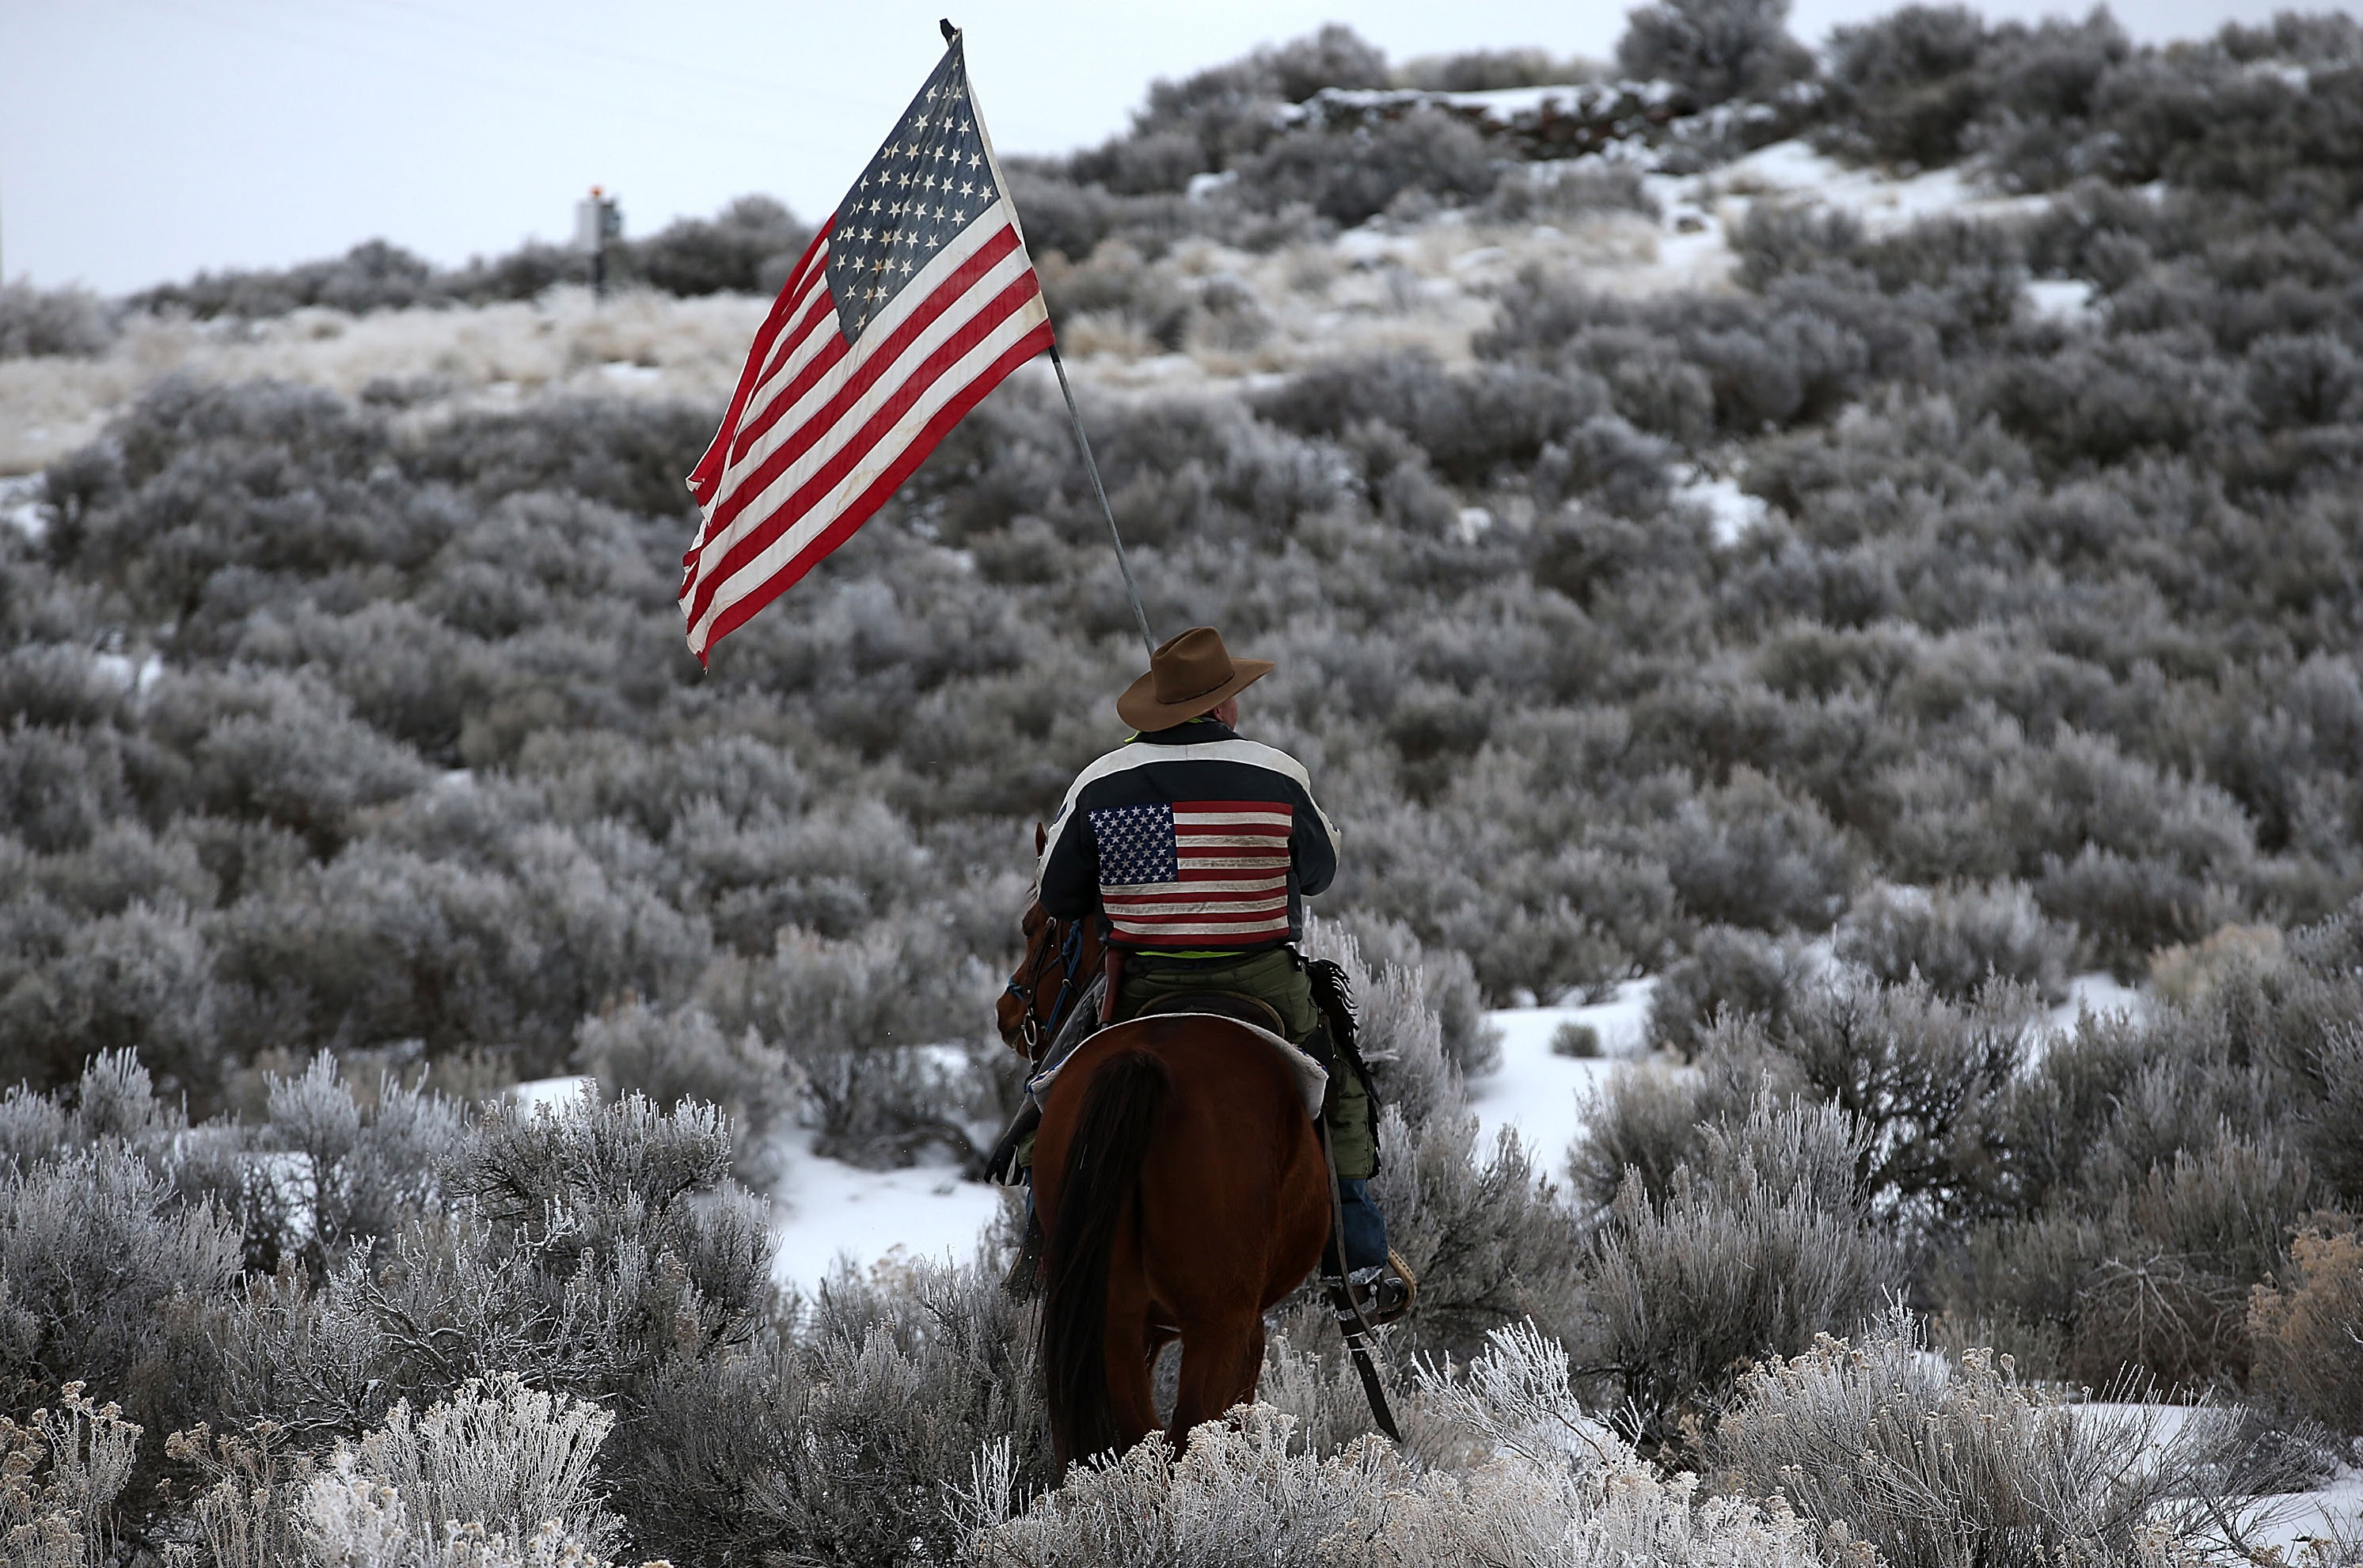 Dwayne Ehmer carries an American flag as he rides his horse on the Malheur National Wildlife Refuge near Burns, Ore., on Jan. 7, 2016. (Justin Sullivan—Getty Images)